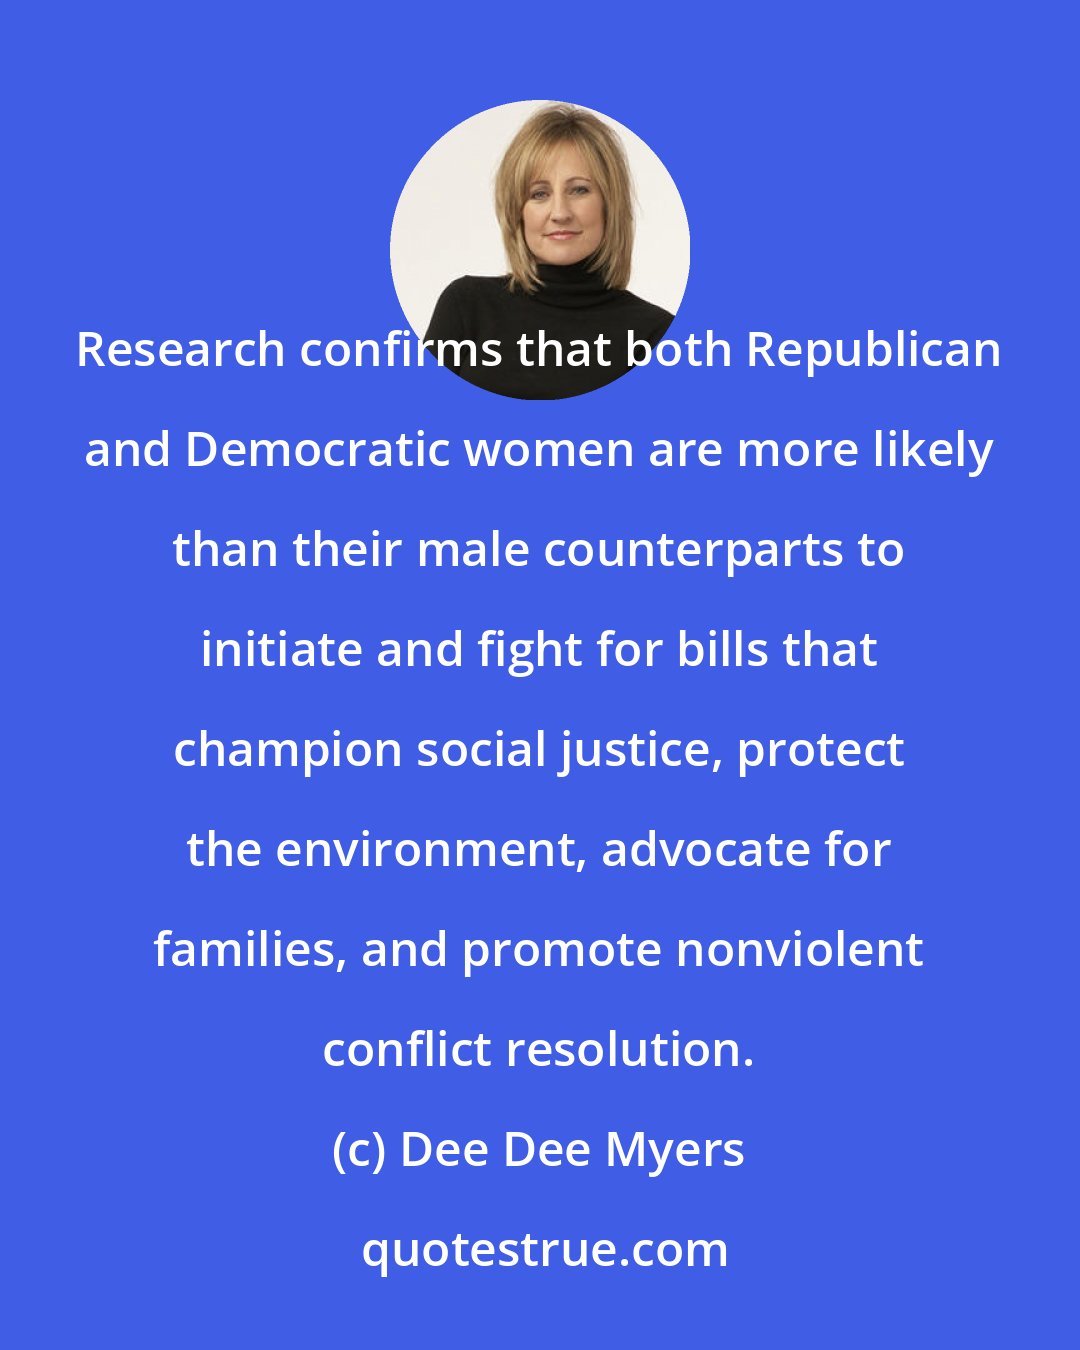 Dee Dee Myers: Research confirms that both Republican and Democratic women are more likely than their male counterparts to initiate and fight for bills that champion social justice, protect the environment, advocate for families, and promote nonviolent conflict resolution.